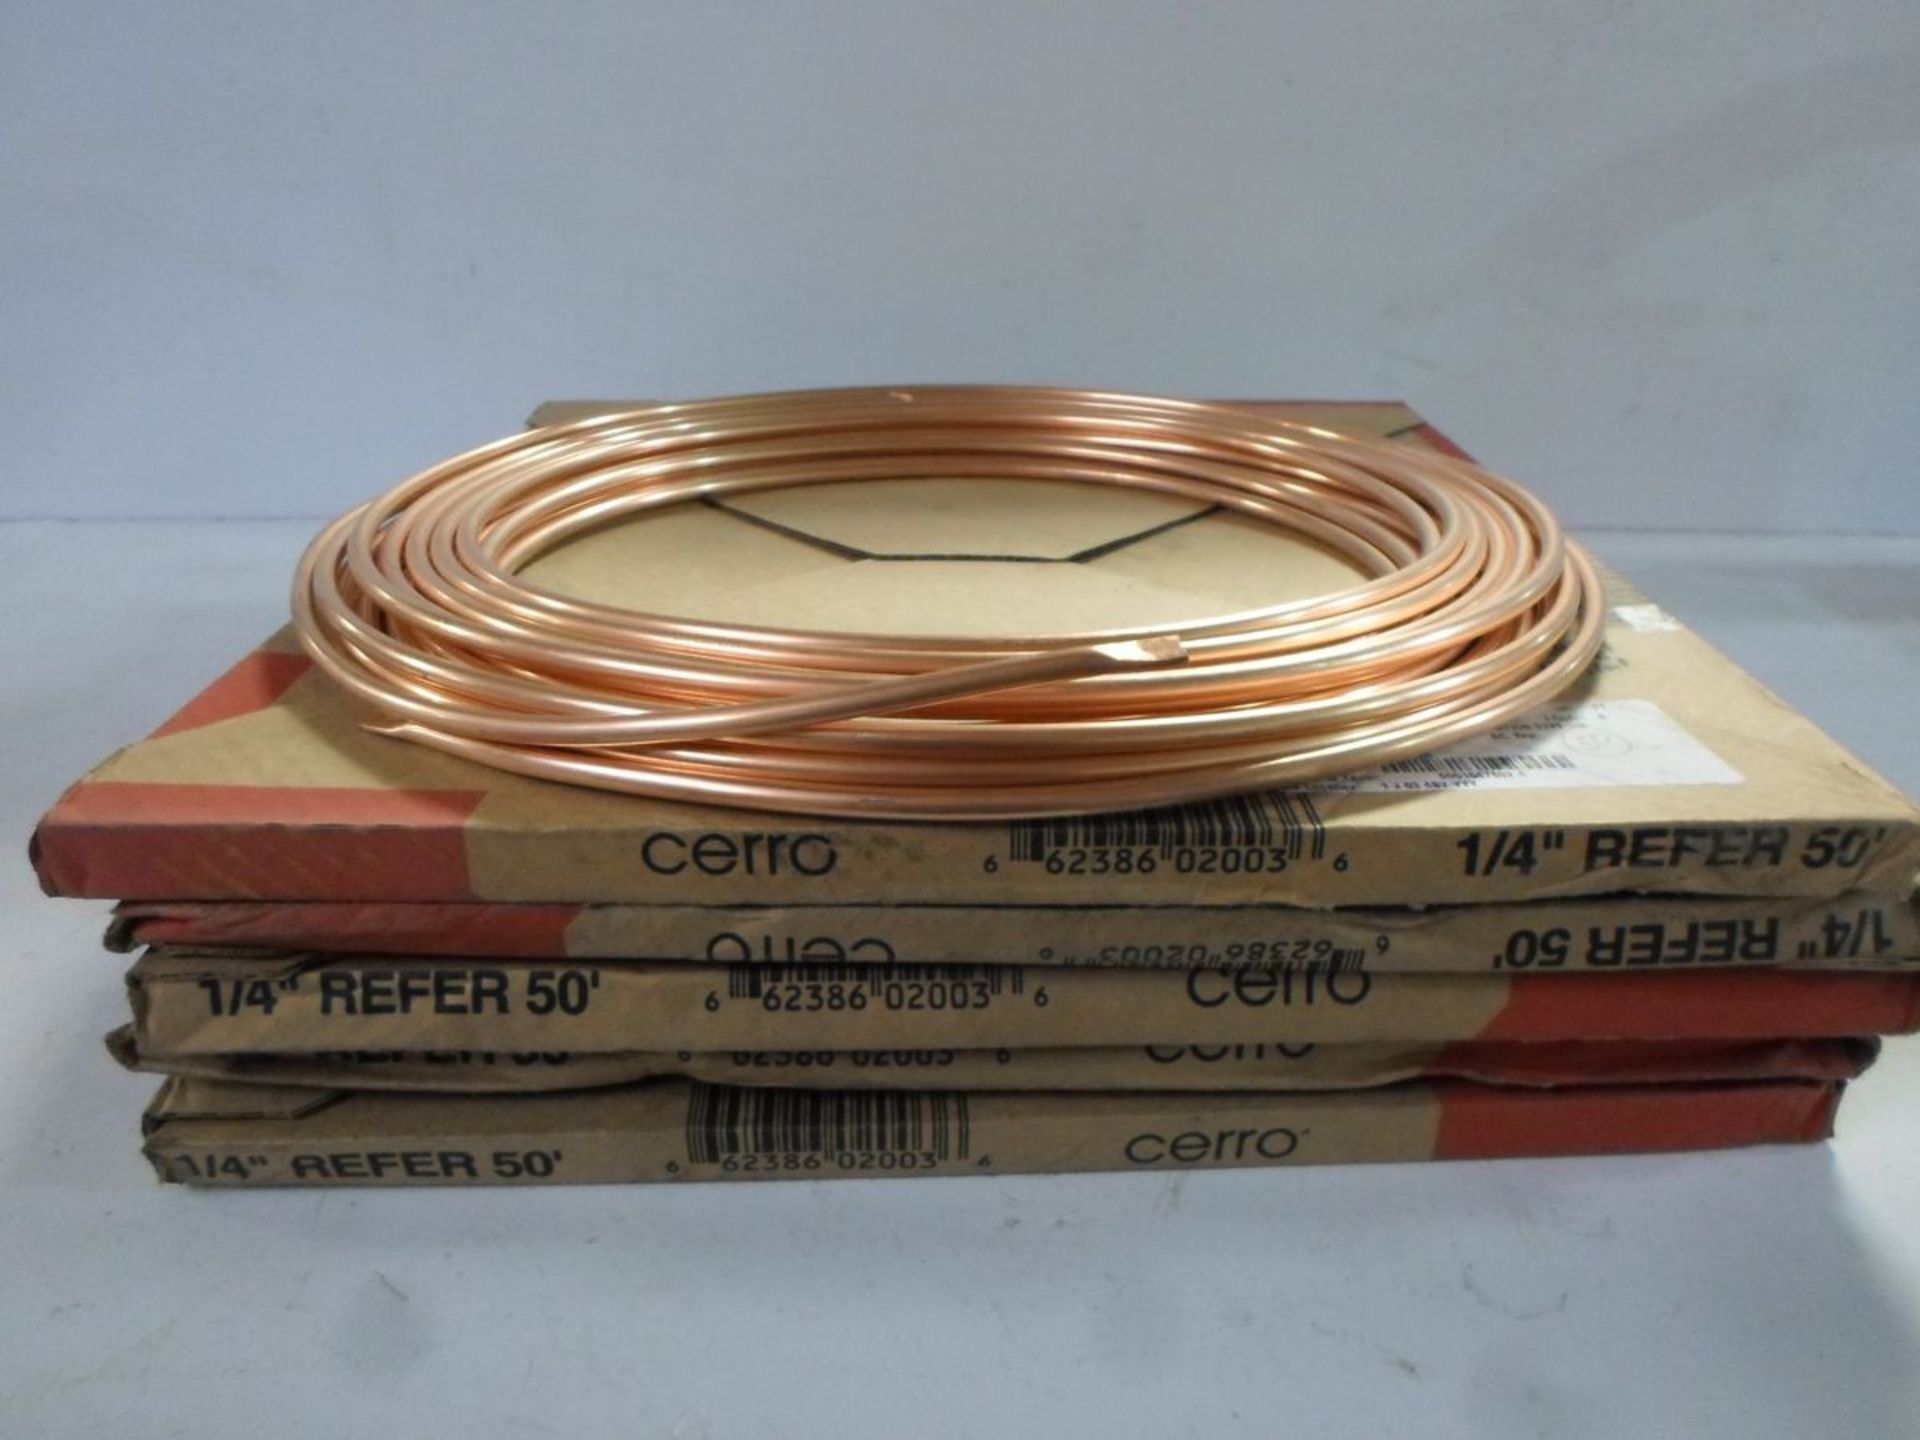 LOT OF FIVE 1/4" REFER 50' TUBING COPPER SOFT COPPER REFRIGERATION - Image 2 of 3